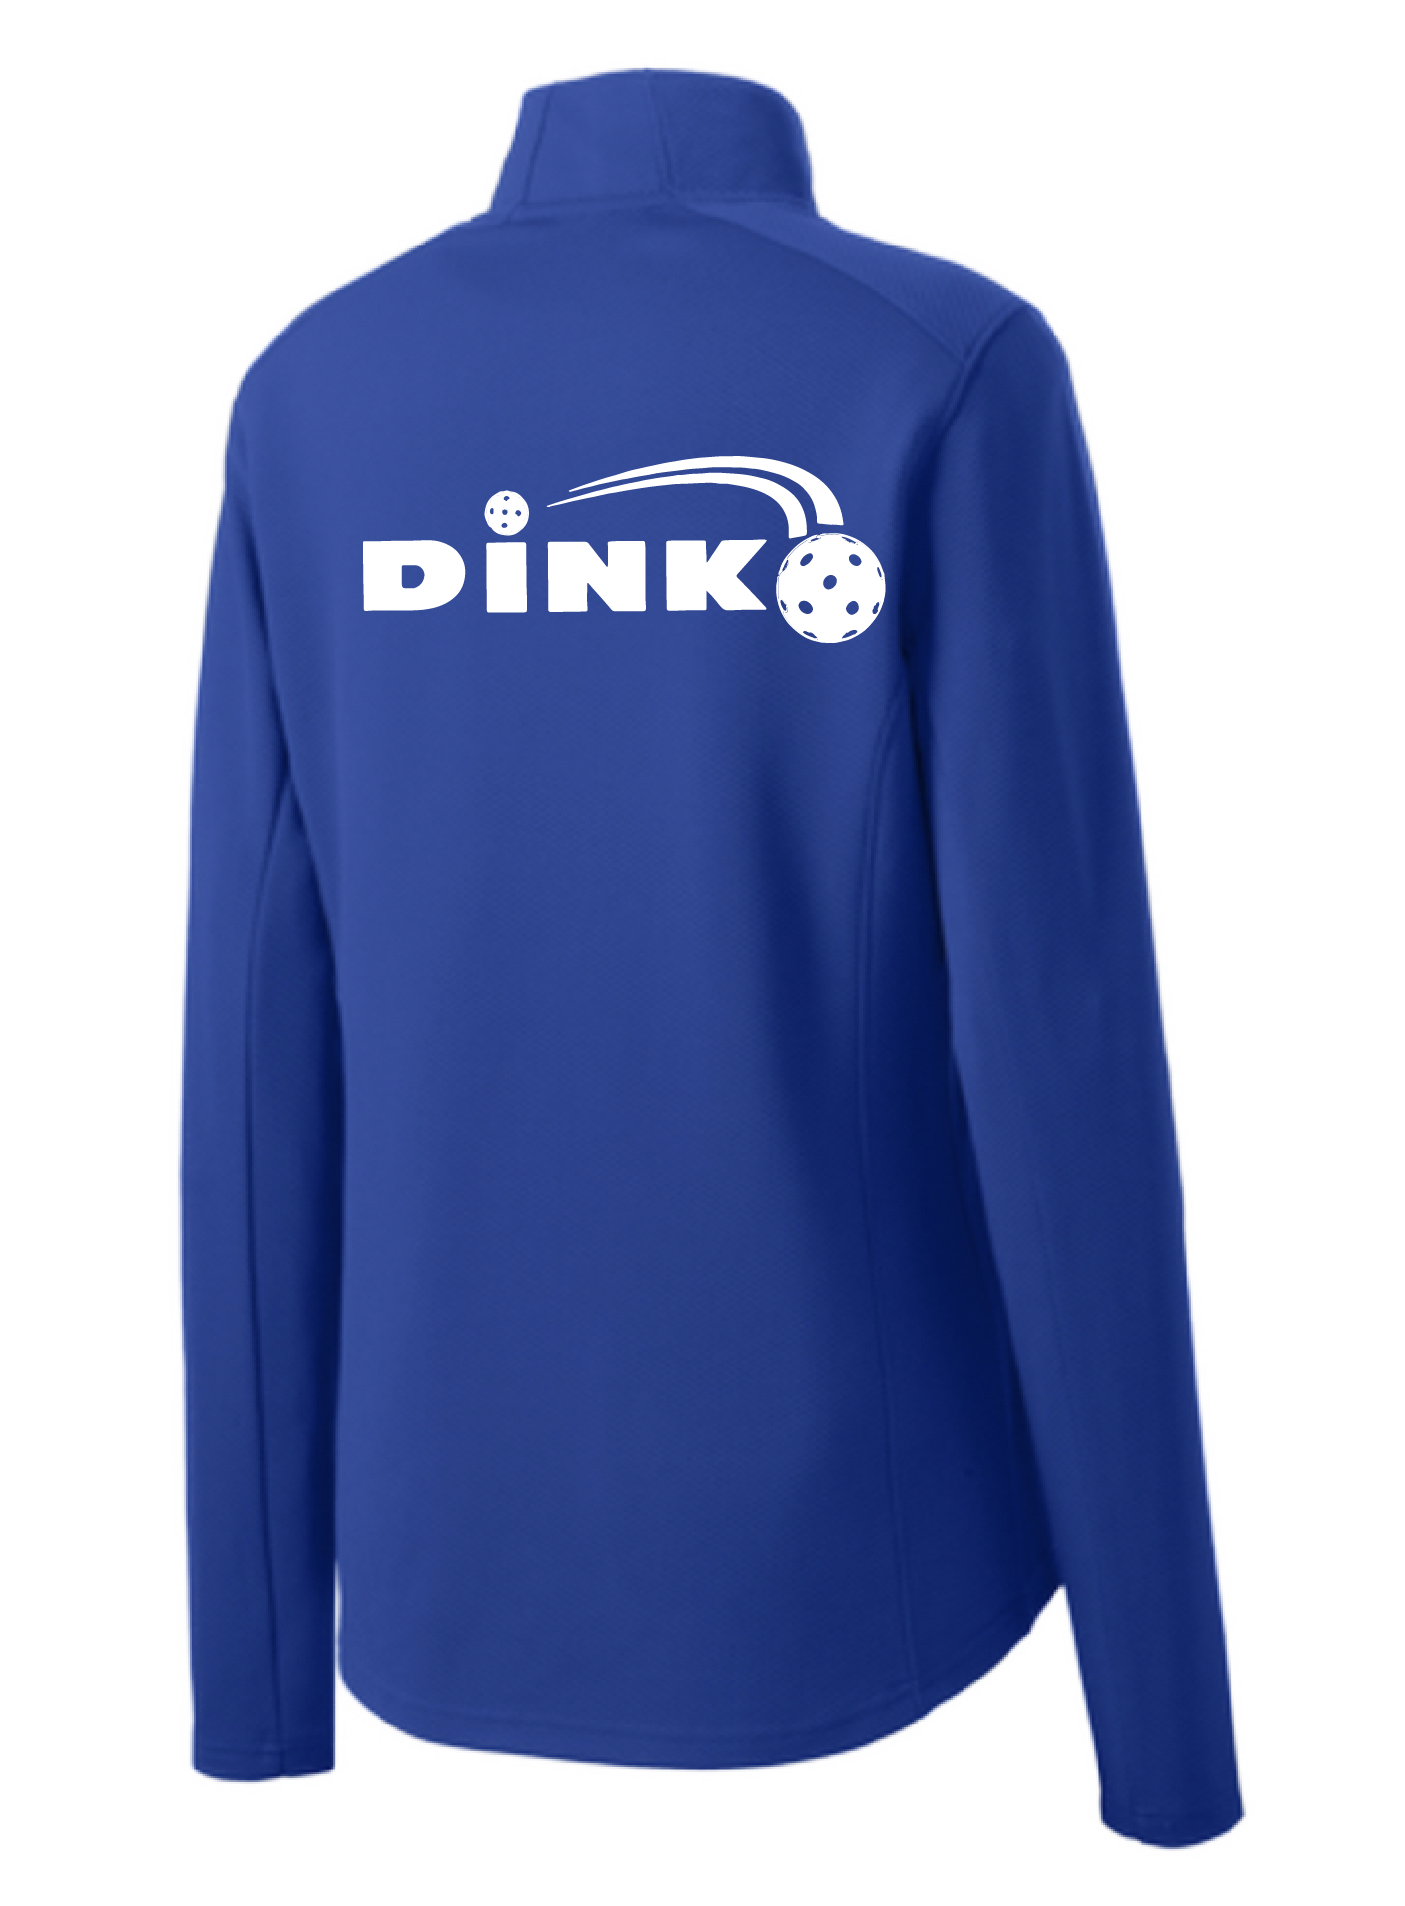 Pickleball Design: Dink  Women's 1/4-Zip Pullover: Princess seams and Drop tail hem.  Turn up the volume in this Women's shirt with its perfect mix of softness and attitude. Material is ultra-comfortable with moisture wicking properties and tri-blend softness. PosiCharge technology locks in color. Highly breathable and lightweight. Versatile enough for wearing year-round.